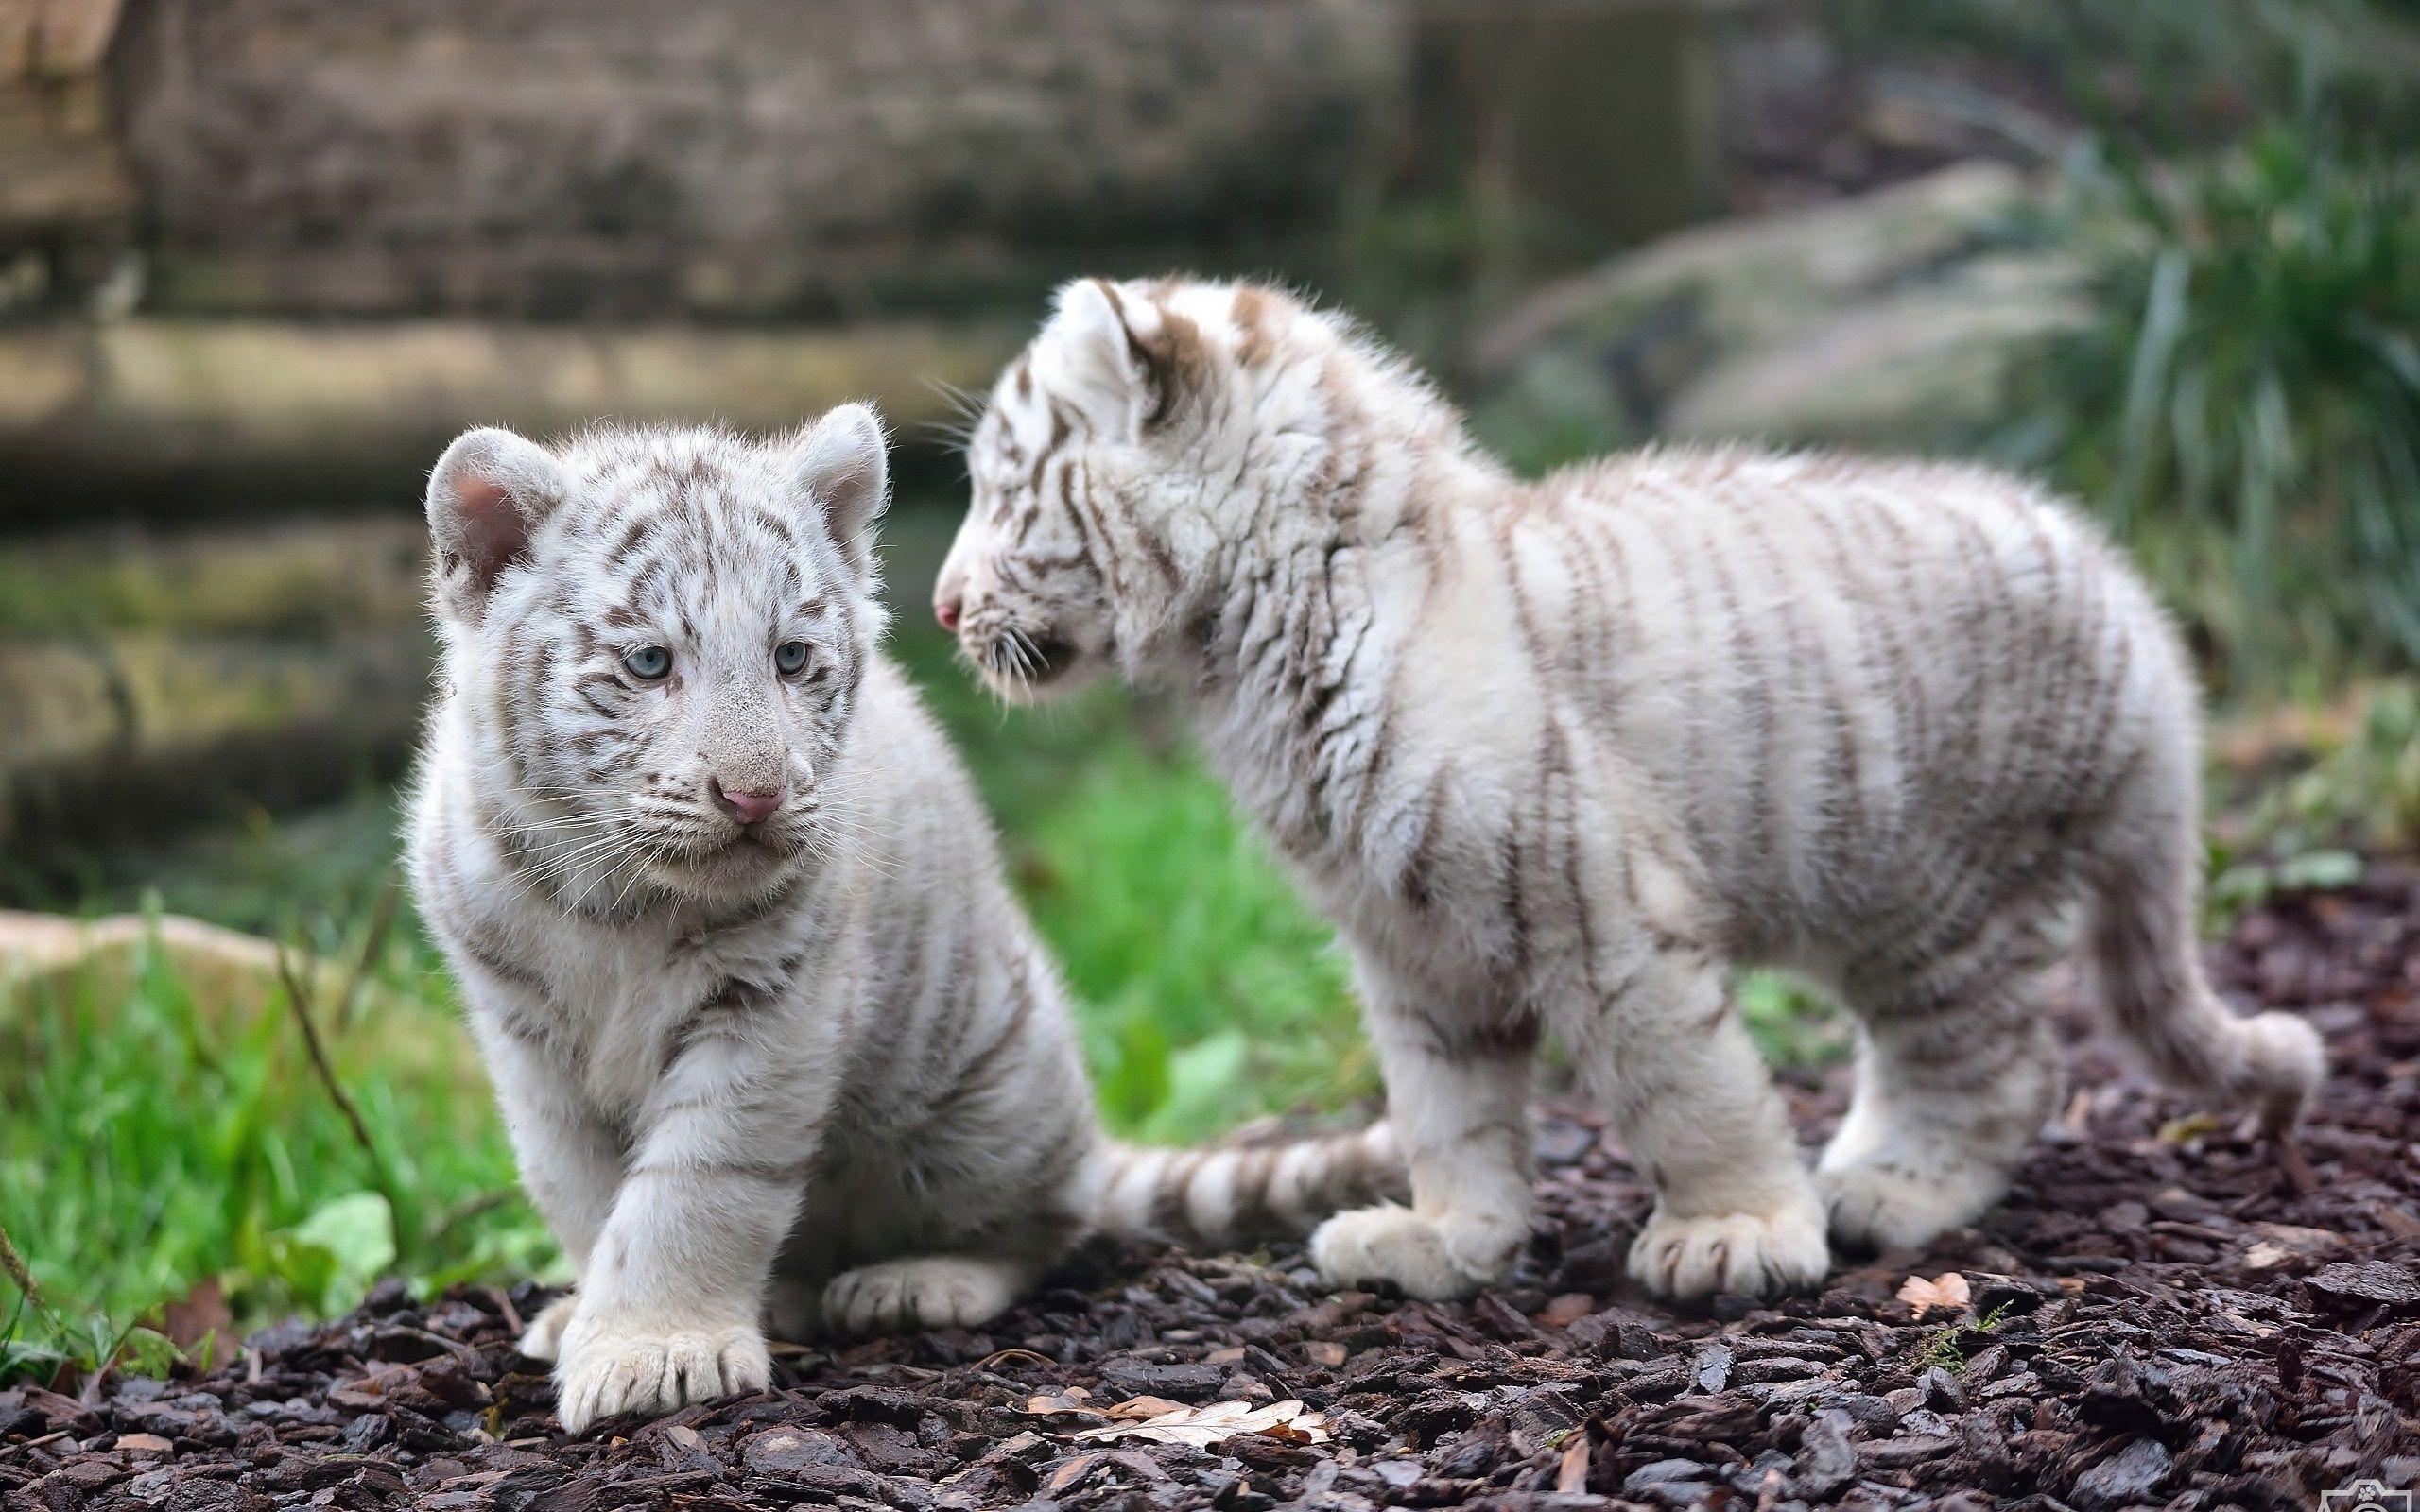 White Tiger HD Wallpaper and Background Image